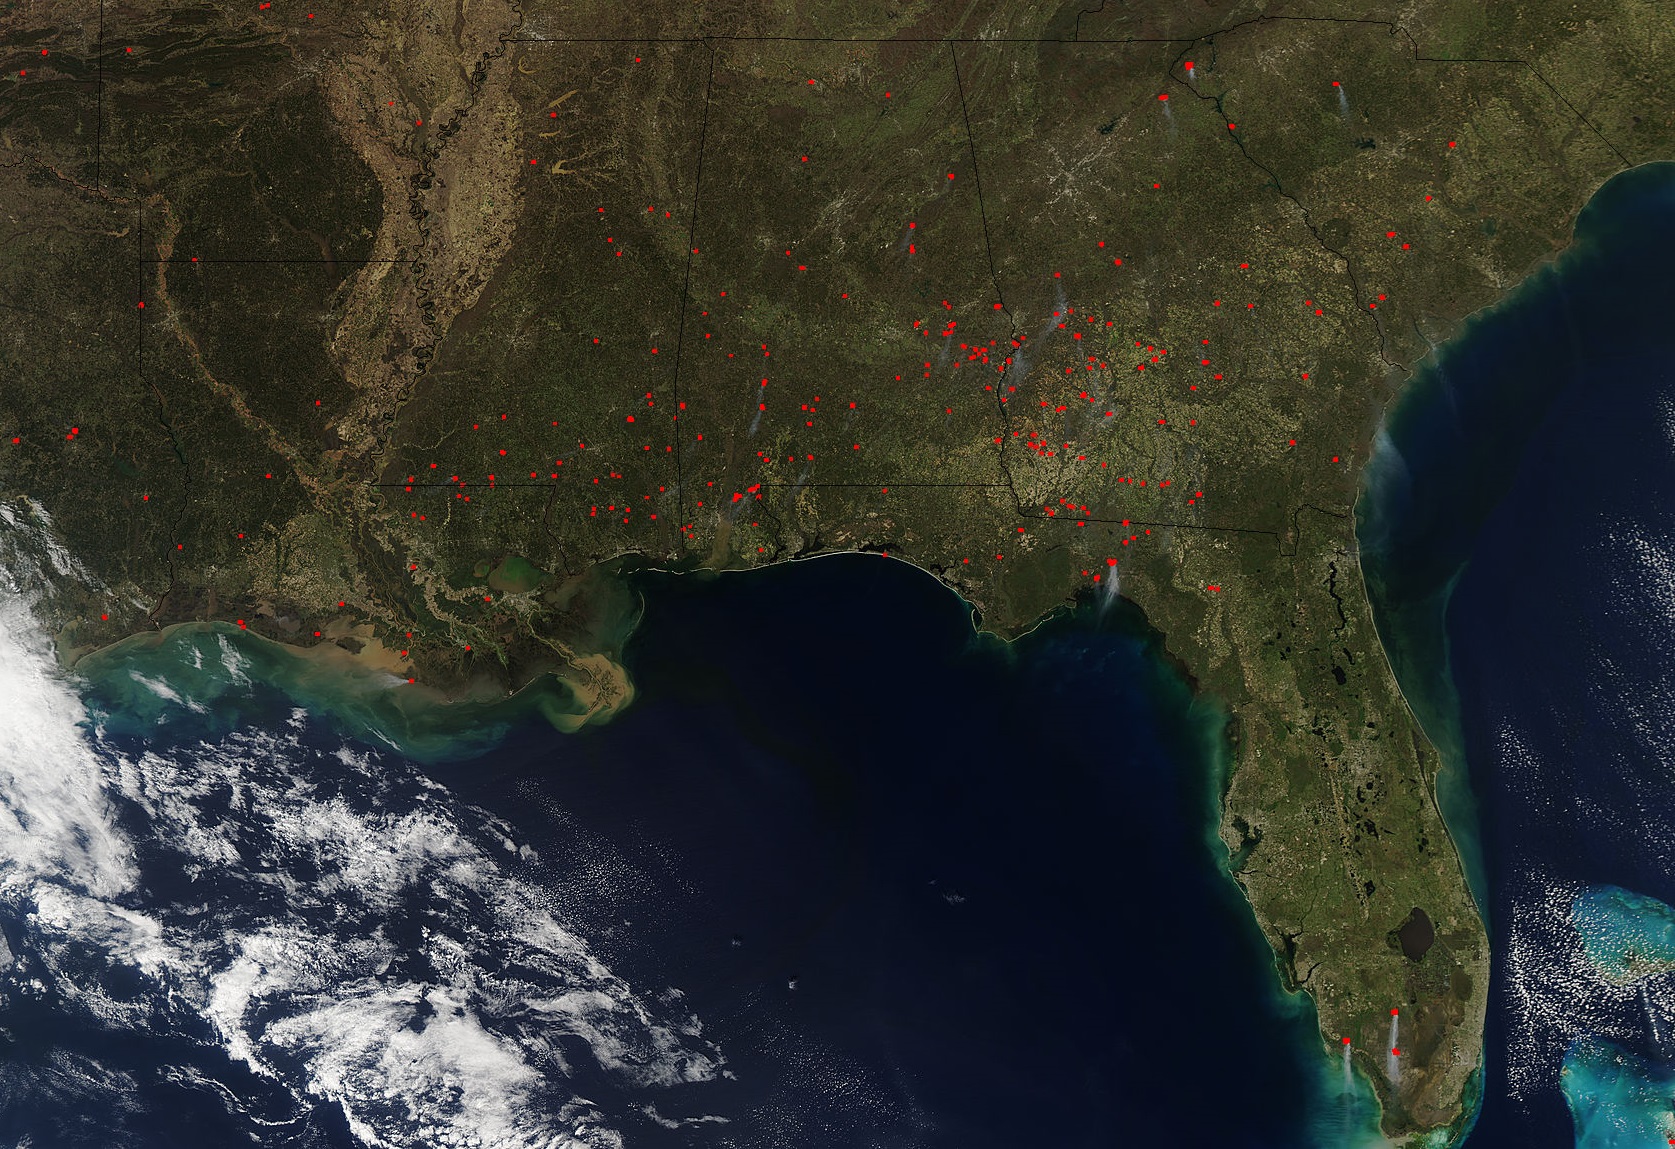 March 2018 image from NASA’s Aqua satellite shows actively burning areas in southeastern U.S. are shown as red dots.